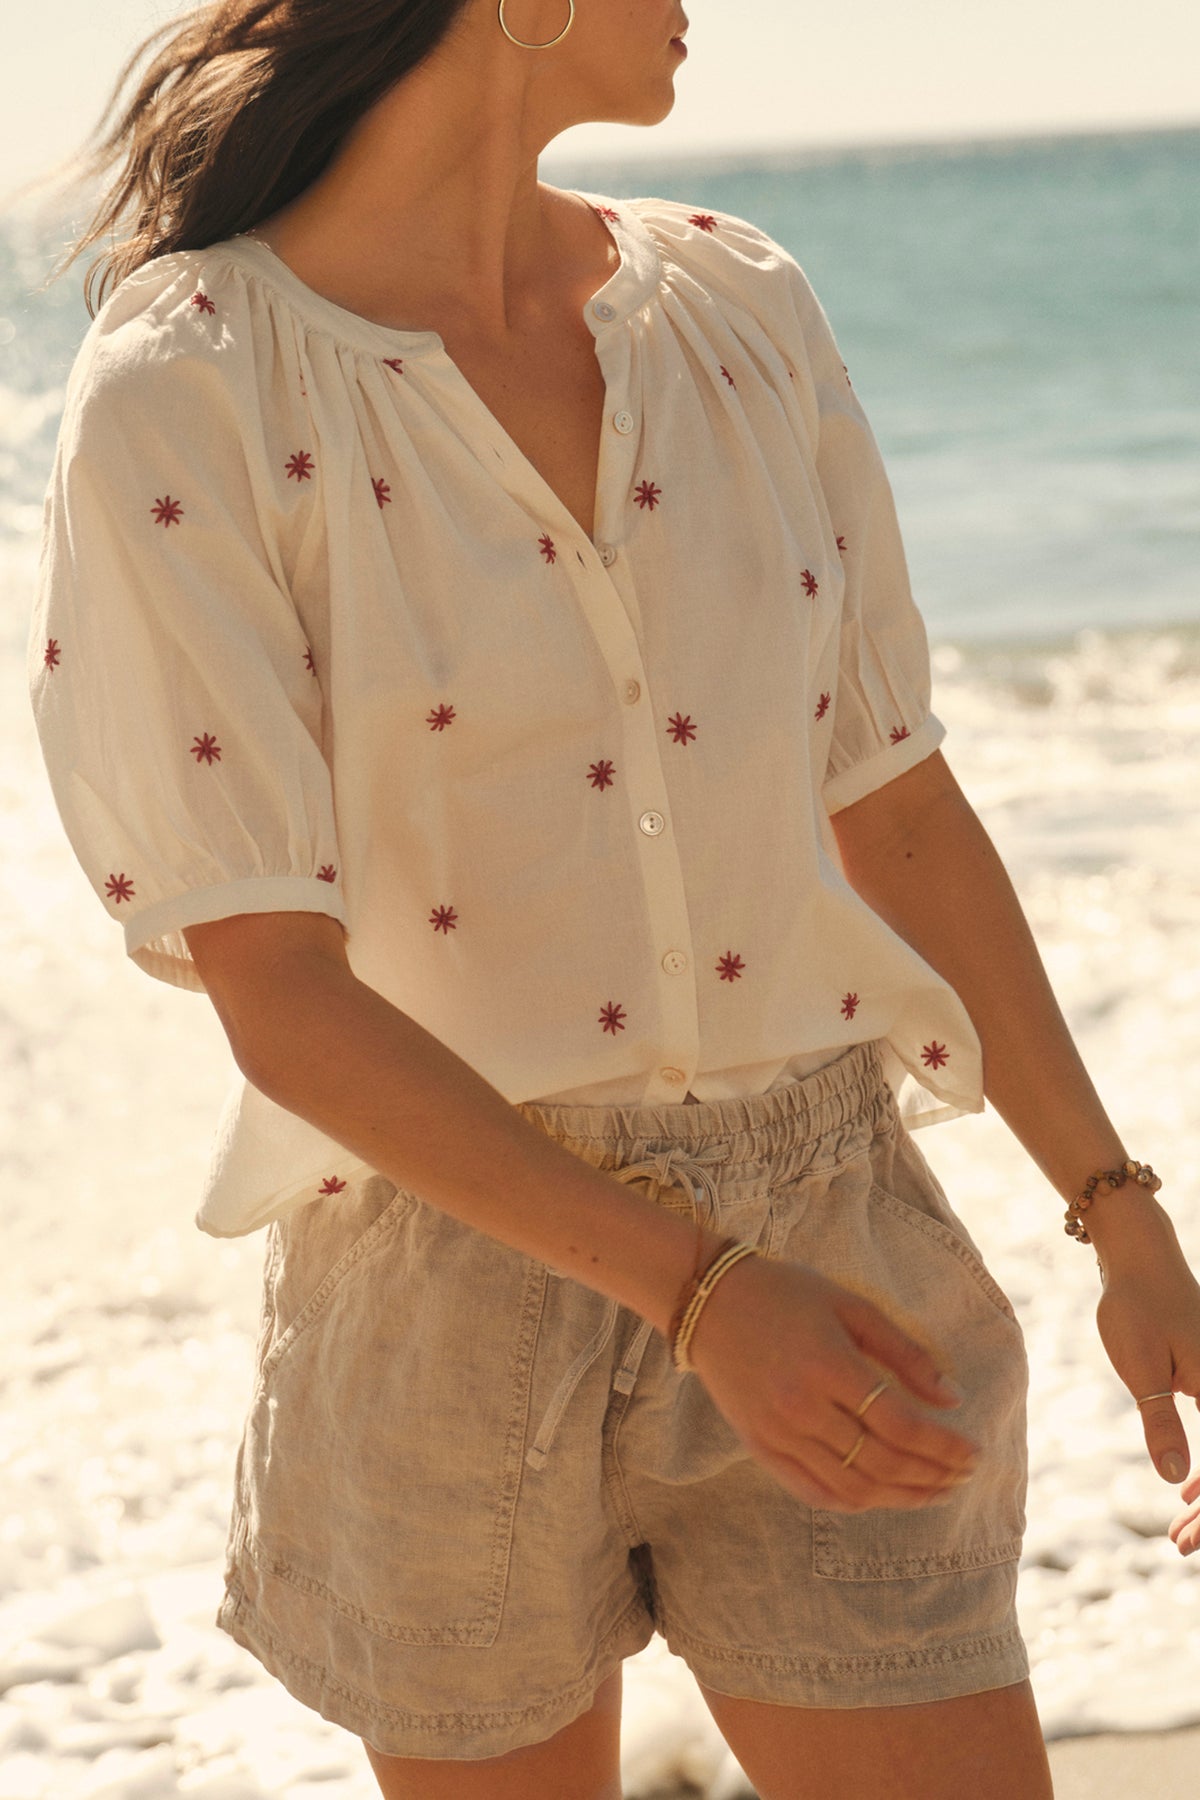 Woman in a white blouse with red floral embroidery, featuring a split neck, and beige shorts, walking on a sunny beach wearing the AMIRA TOP by Velvet by Graham & Spencer.-36910000439489